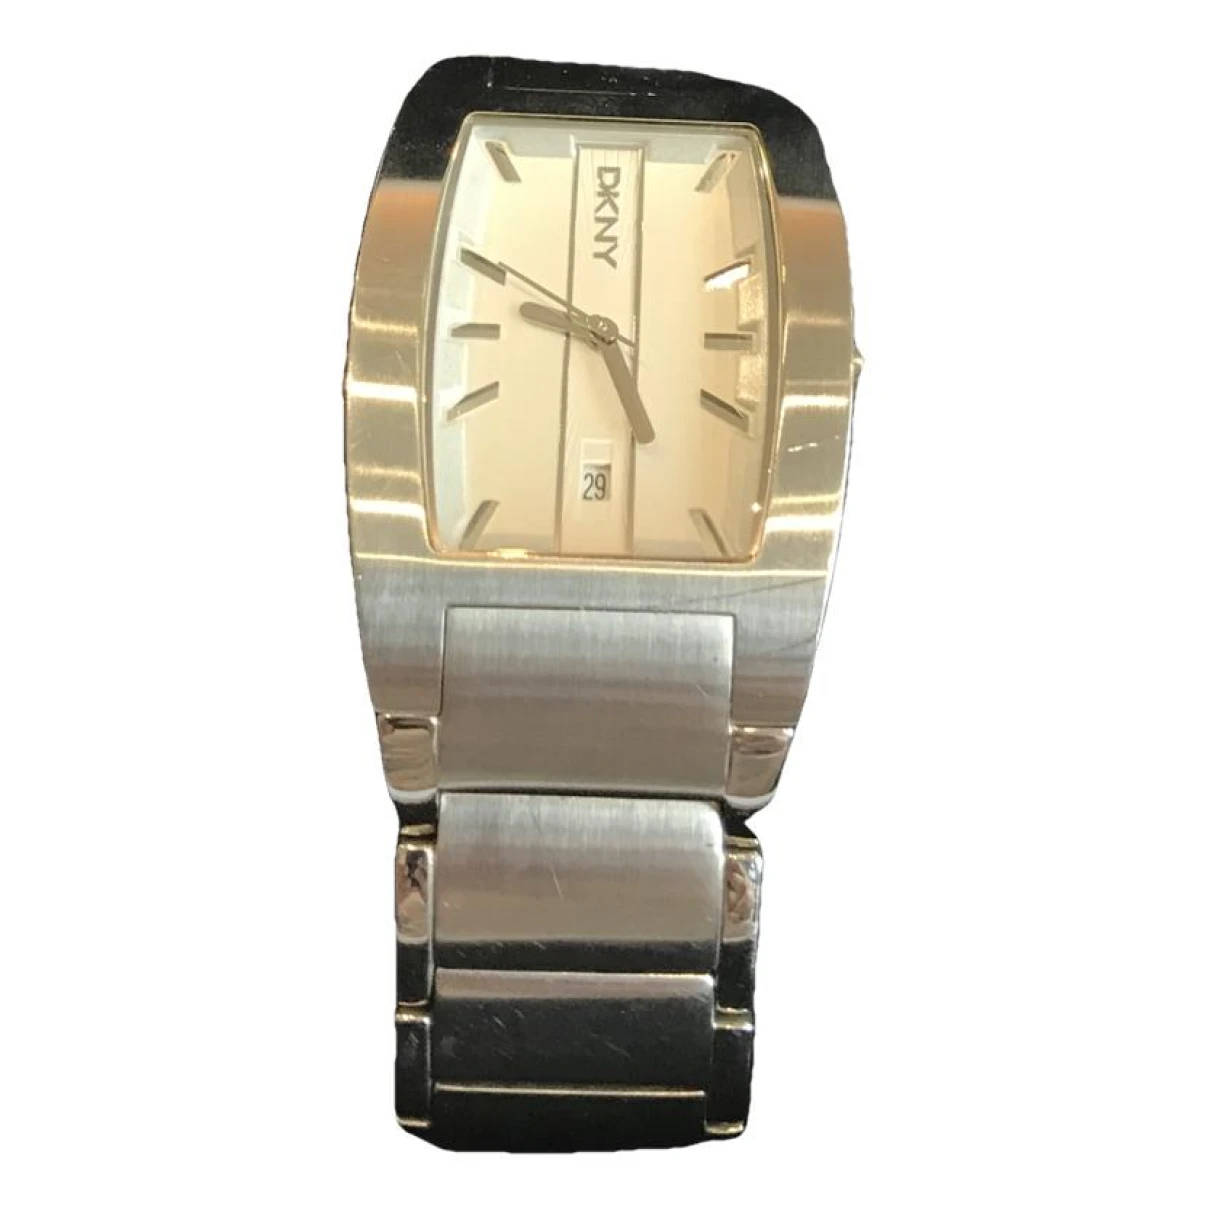 Pre-owned Dkny Watch In Silver